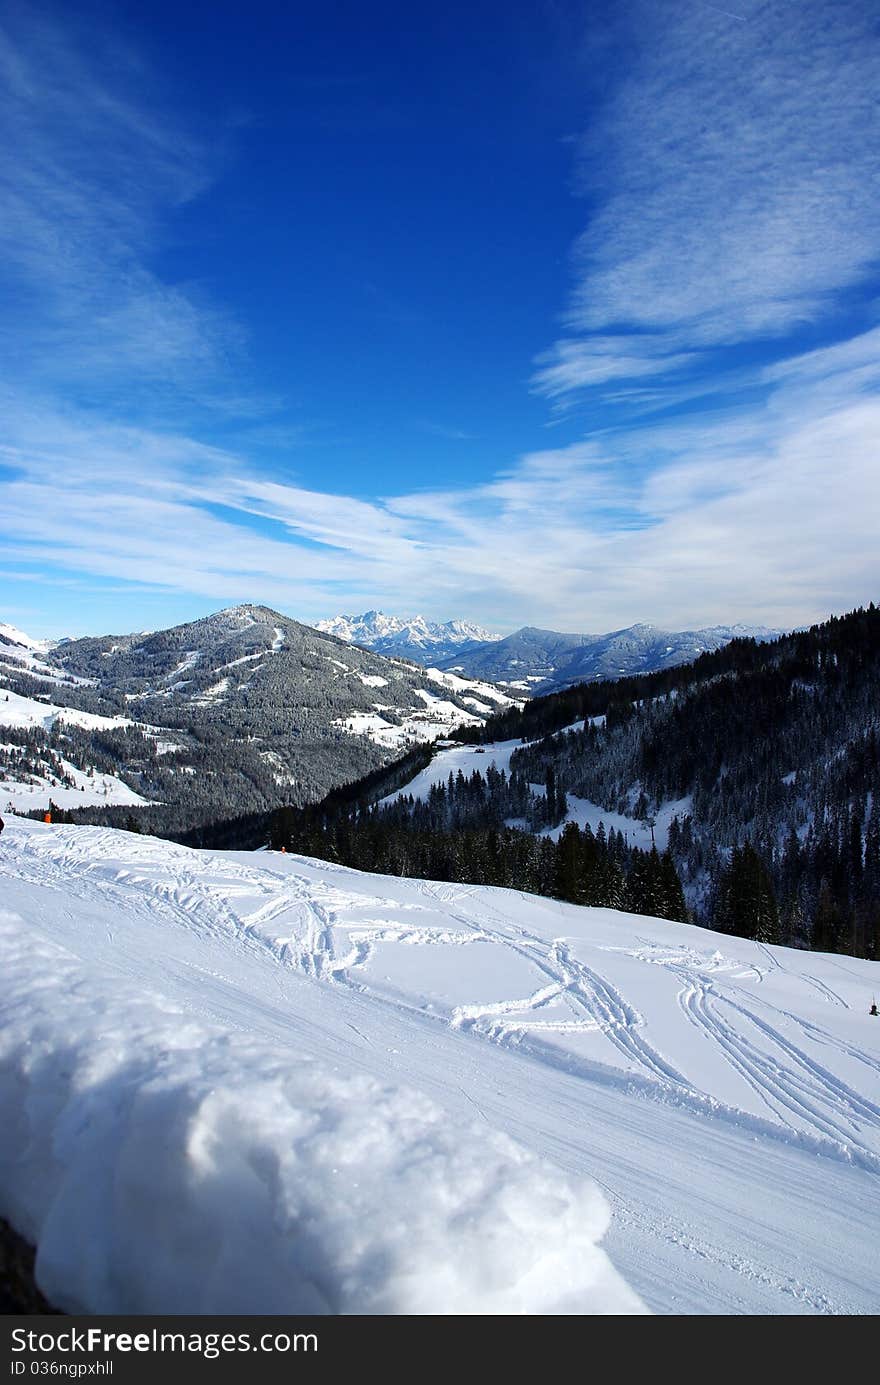 Skiing slopes in the Austrian Alps. Skiing slopes in the Austrian Alps